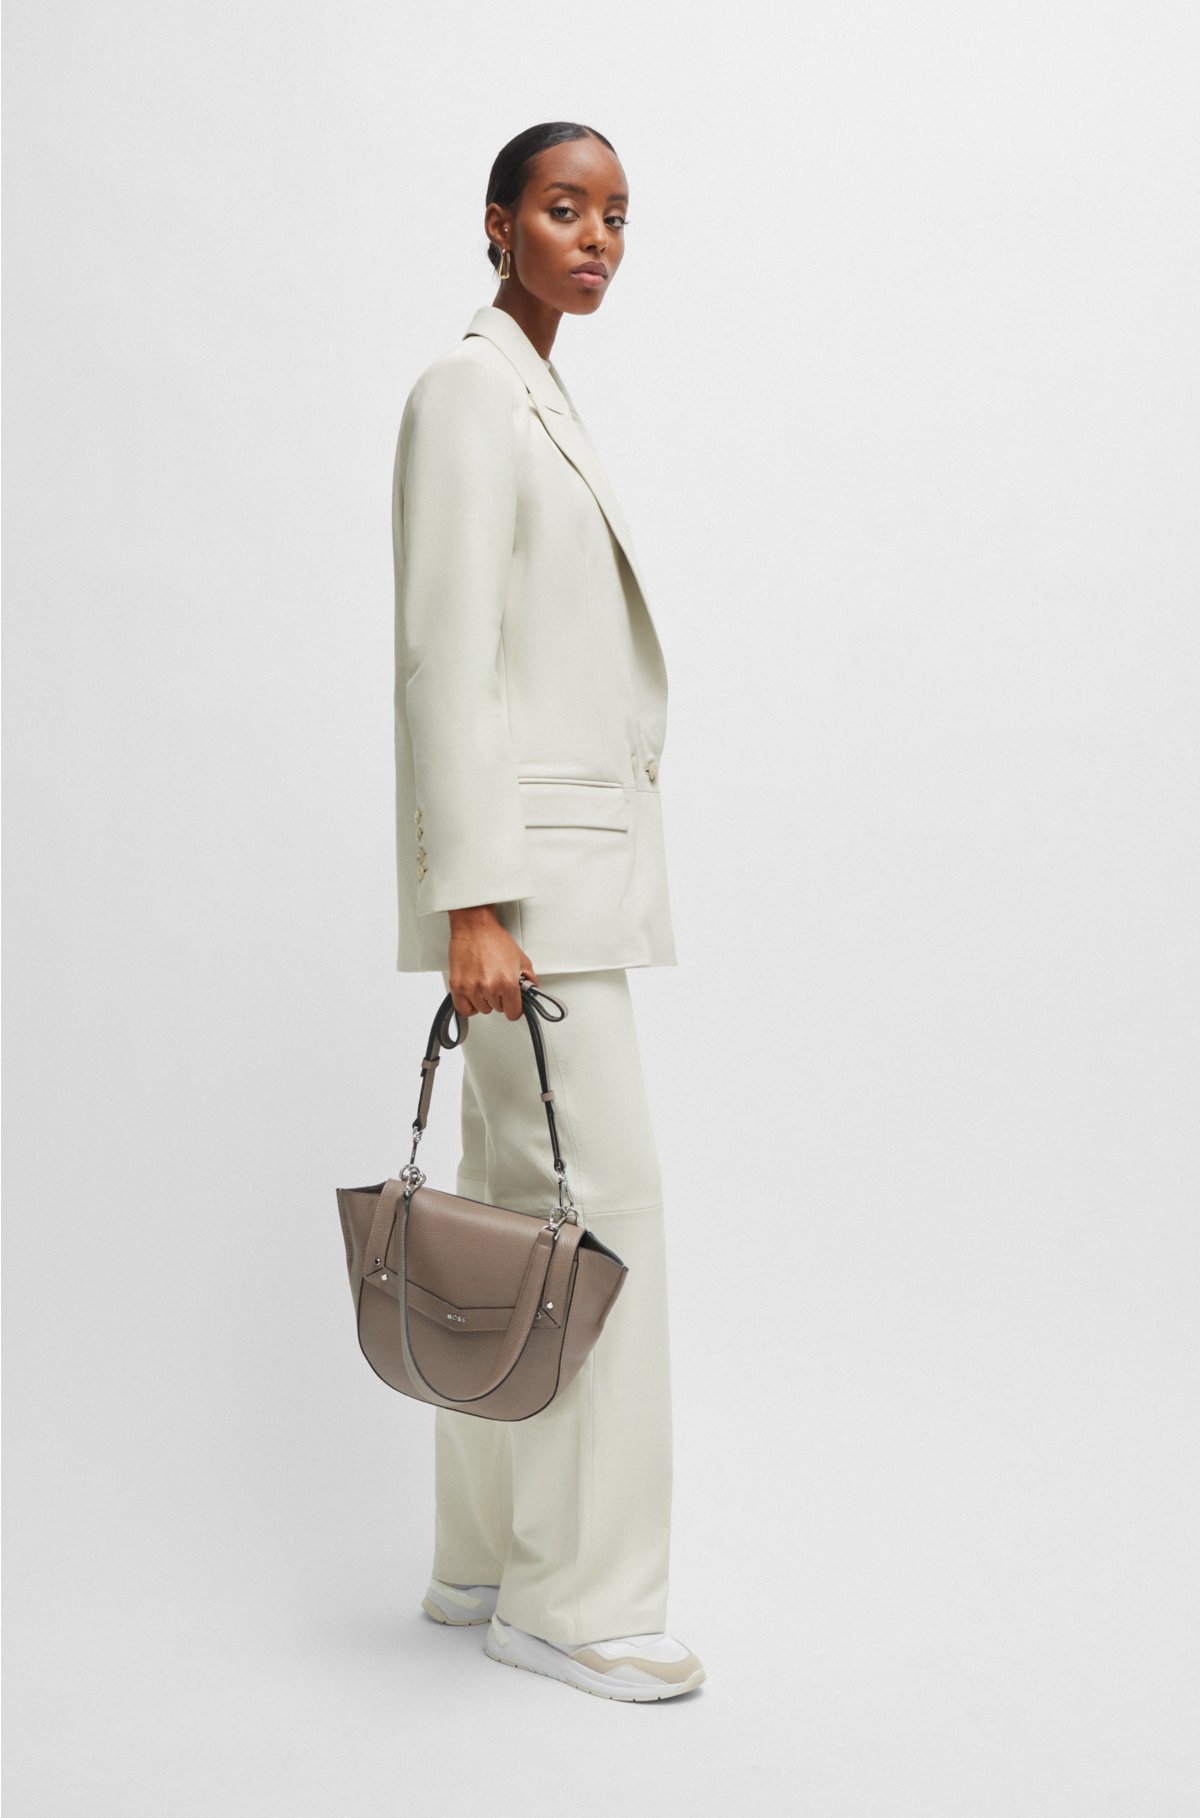 Saddle bag in grained leather with detachable straps, Light Brown